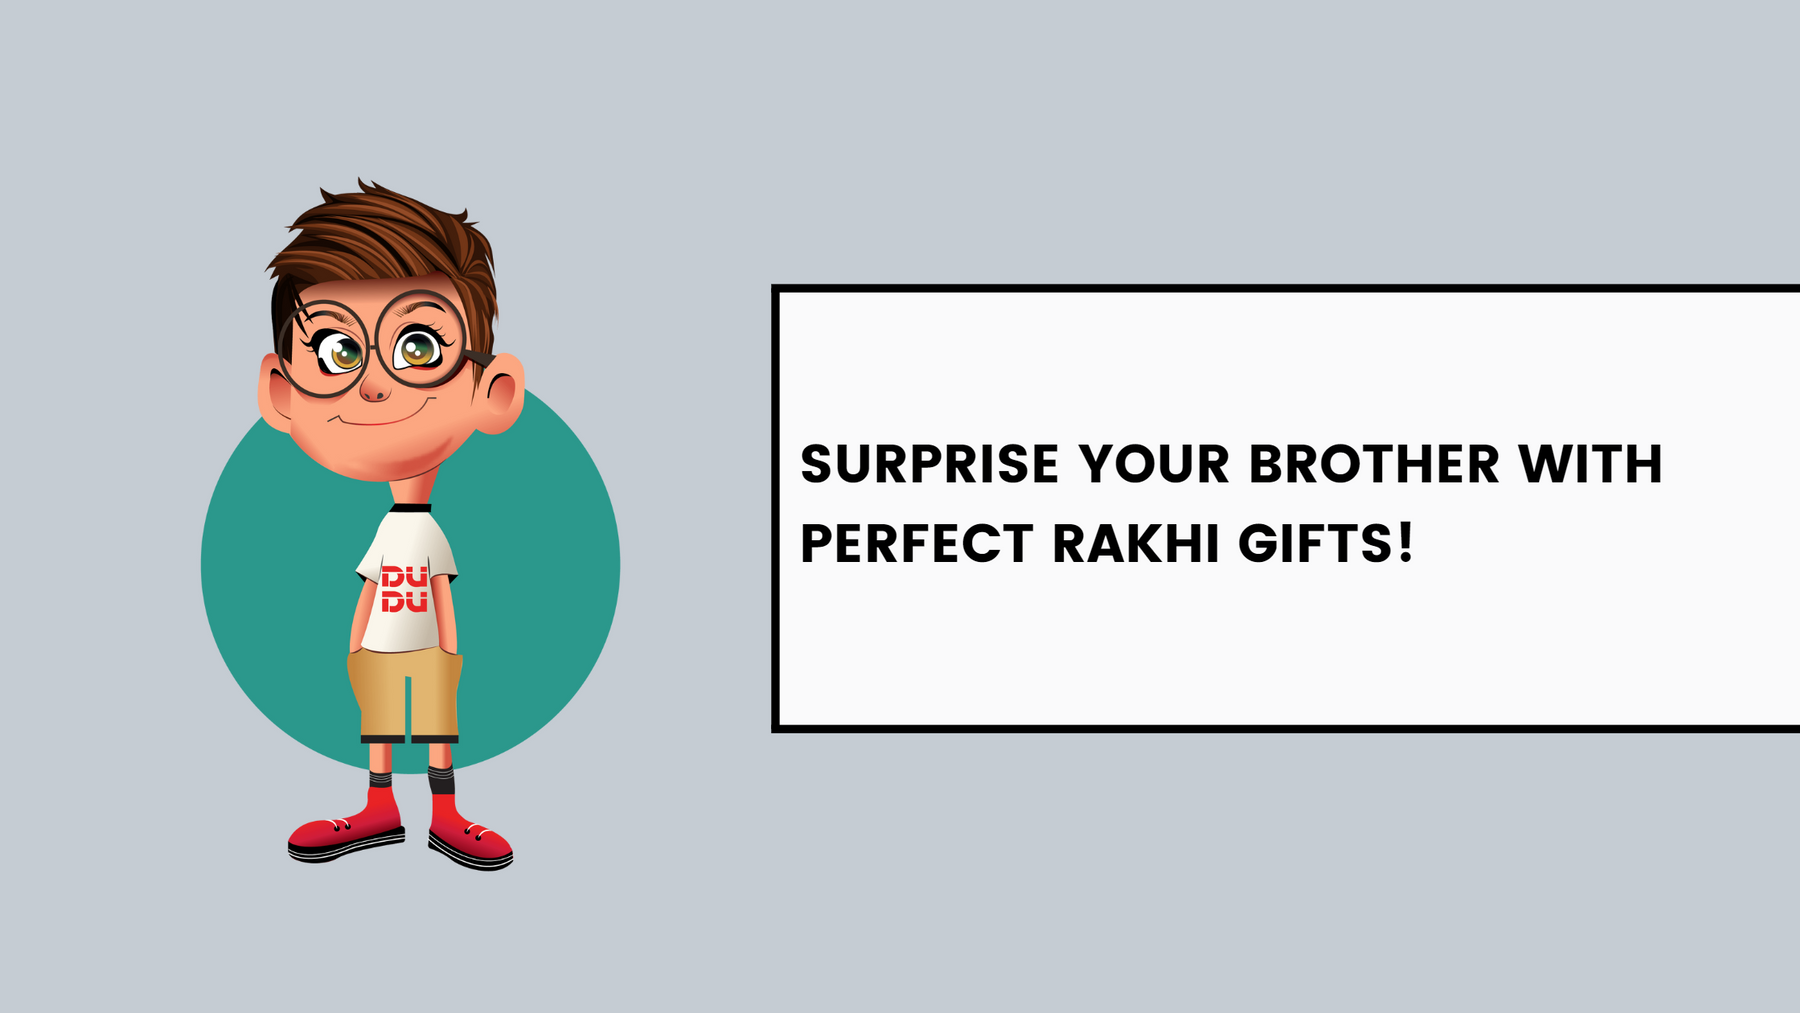 Surprise Your Brother With Perfect Rakhi Gifts!